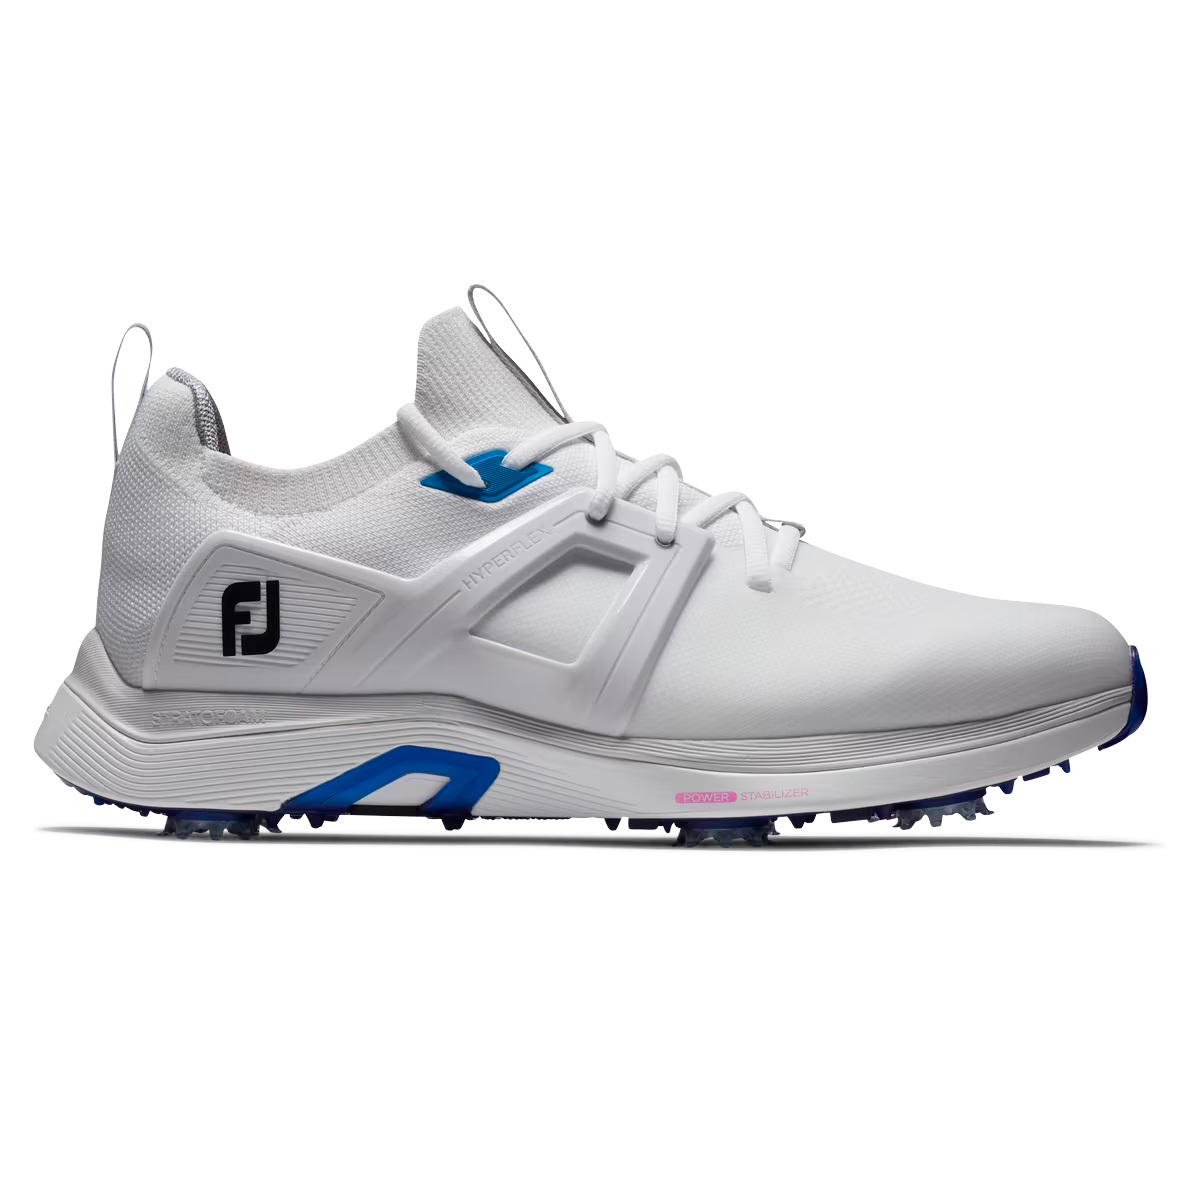 FootJoy Hyperflex Mens Spiked Golf Shoes  - White/Blue/Pink